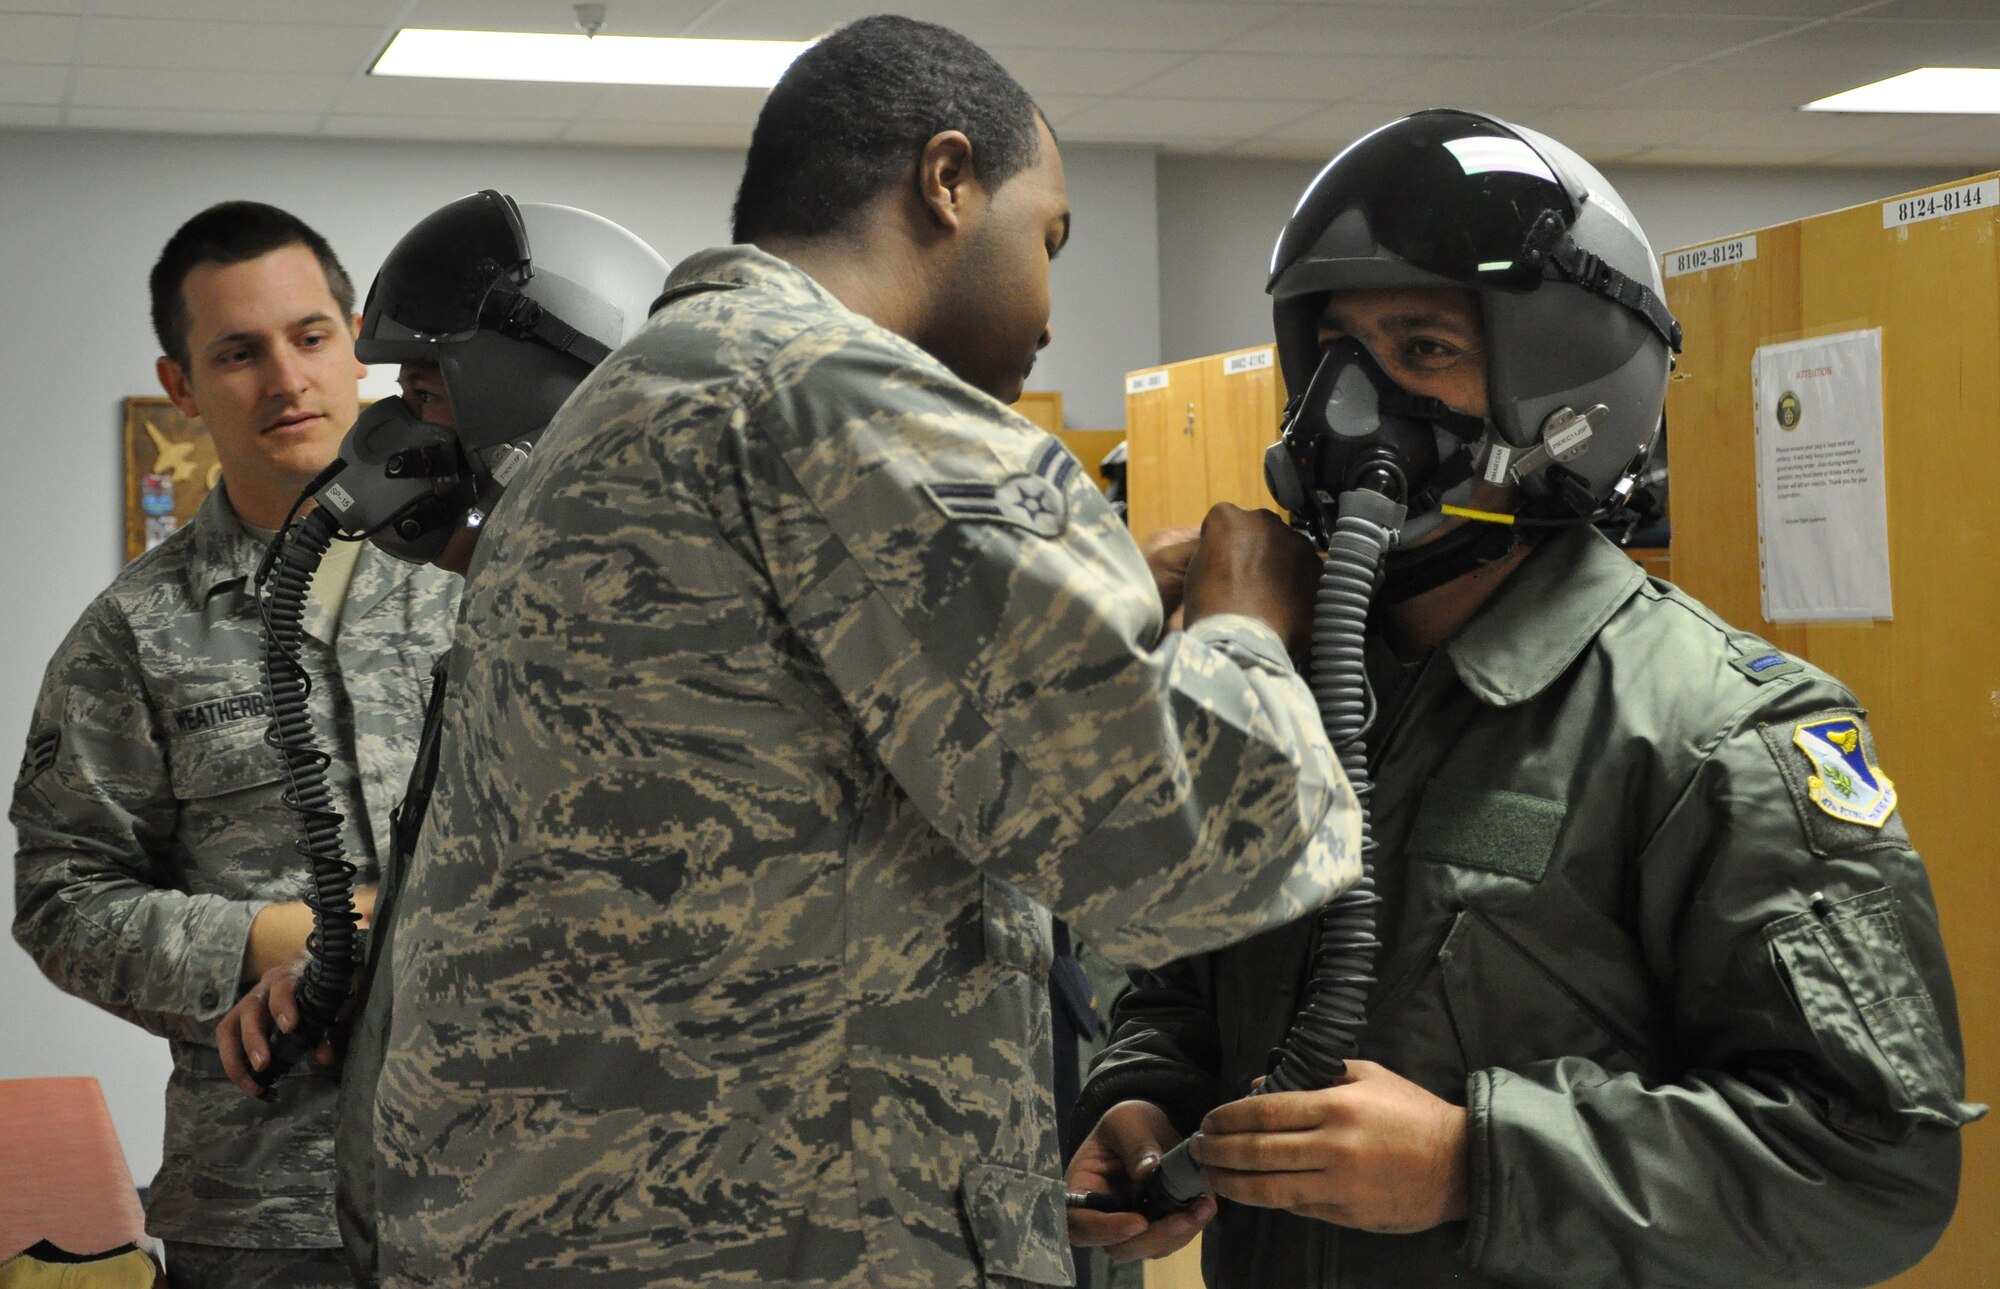 LAUGHLIN AIR FORCE BASE, Texas—Senior Airman Richard Weatherby,47th Operations Support Squadron, and Airman 1st Class Alexander King, 47th OSS, prepare to test the masks on two Afghan lieutenants going through Specialized Undergraduate Pilot Training. Three Afghan lieutenants are the first from Afghanistan to attend SUPT at Laughlin and are scheduled to graduate here Dec. 16. (U.S. Air Force photo/2nd Lt. Angela Martin) 